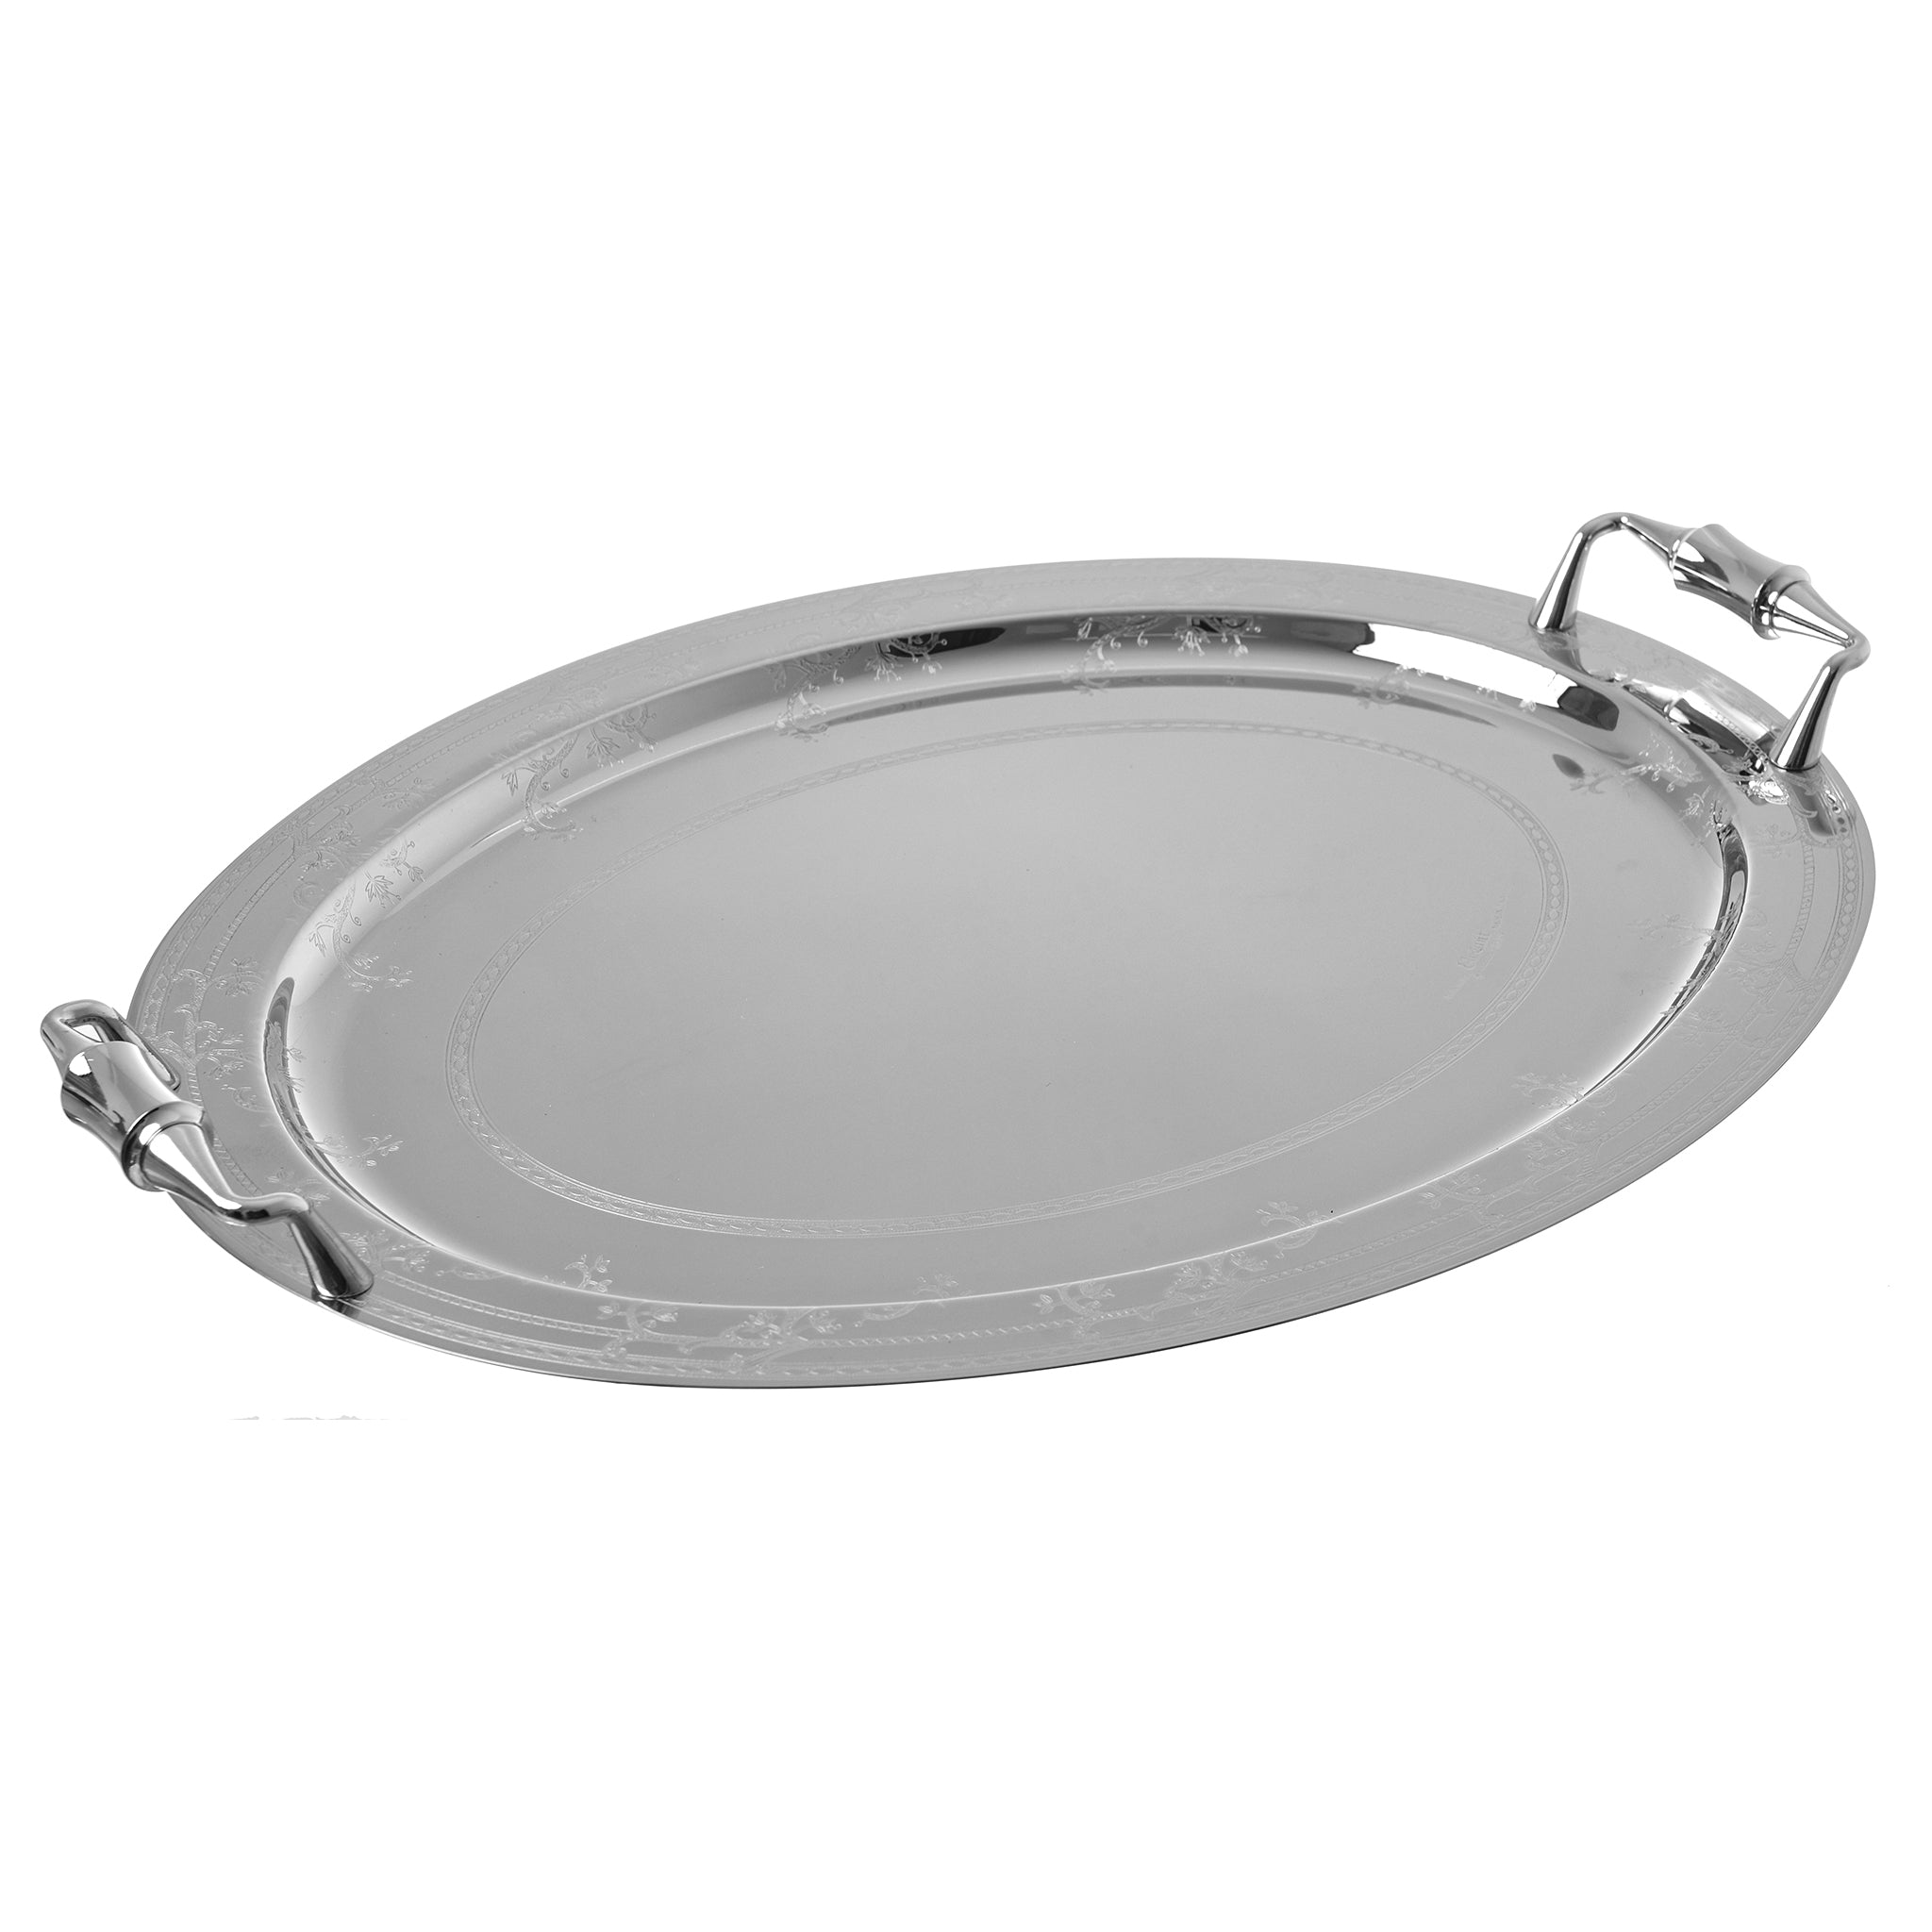 Elegant Gioiel - Oval Tray with Handles - Stainless Steel 18/10 - 48cm - 75000409